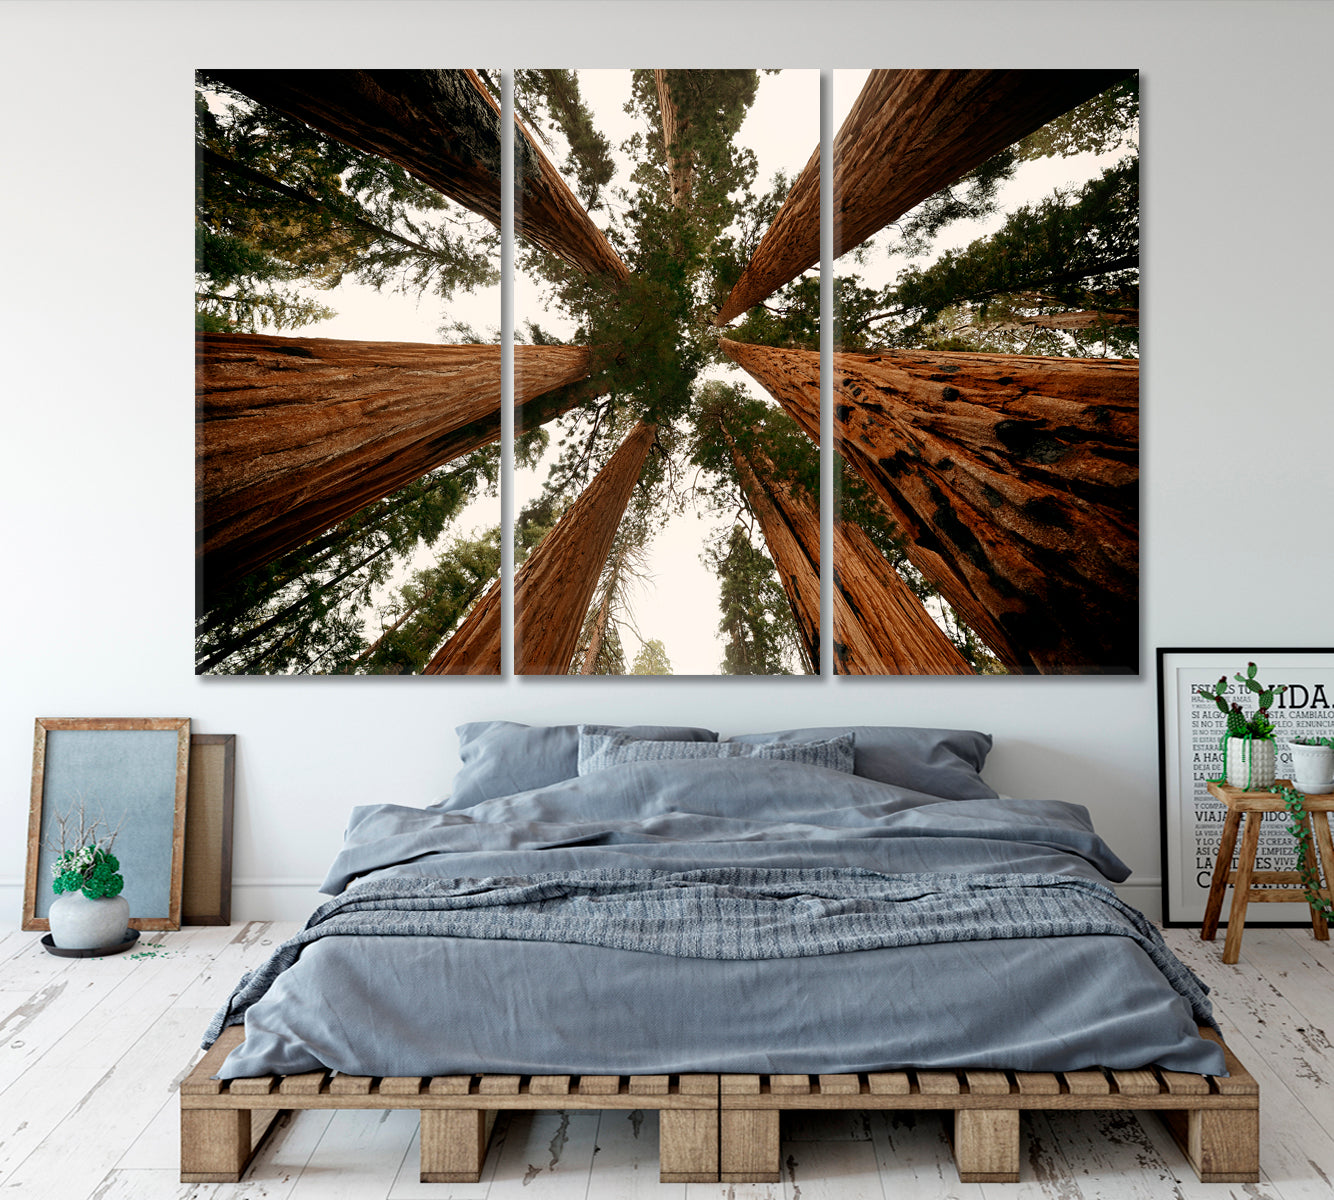 TREES Sequoia and Kings National Park Nature Scenery Nature Wall Canvas Print Artesty 3 panels 36" x 24" 